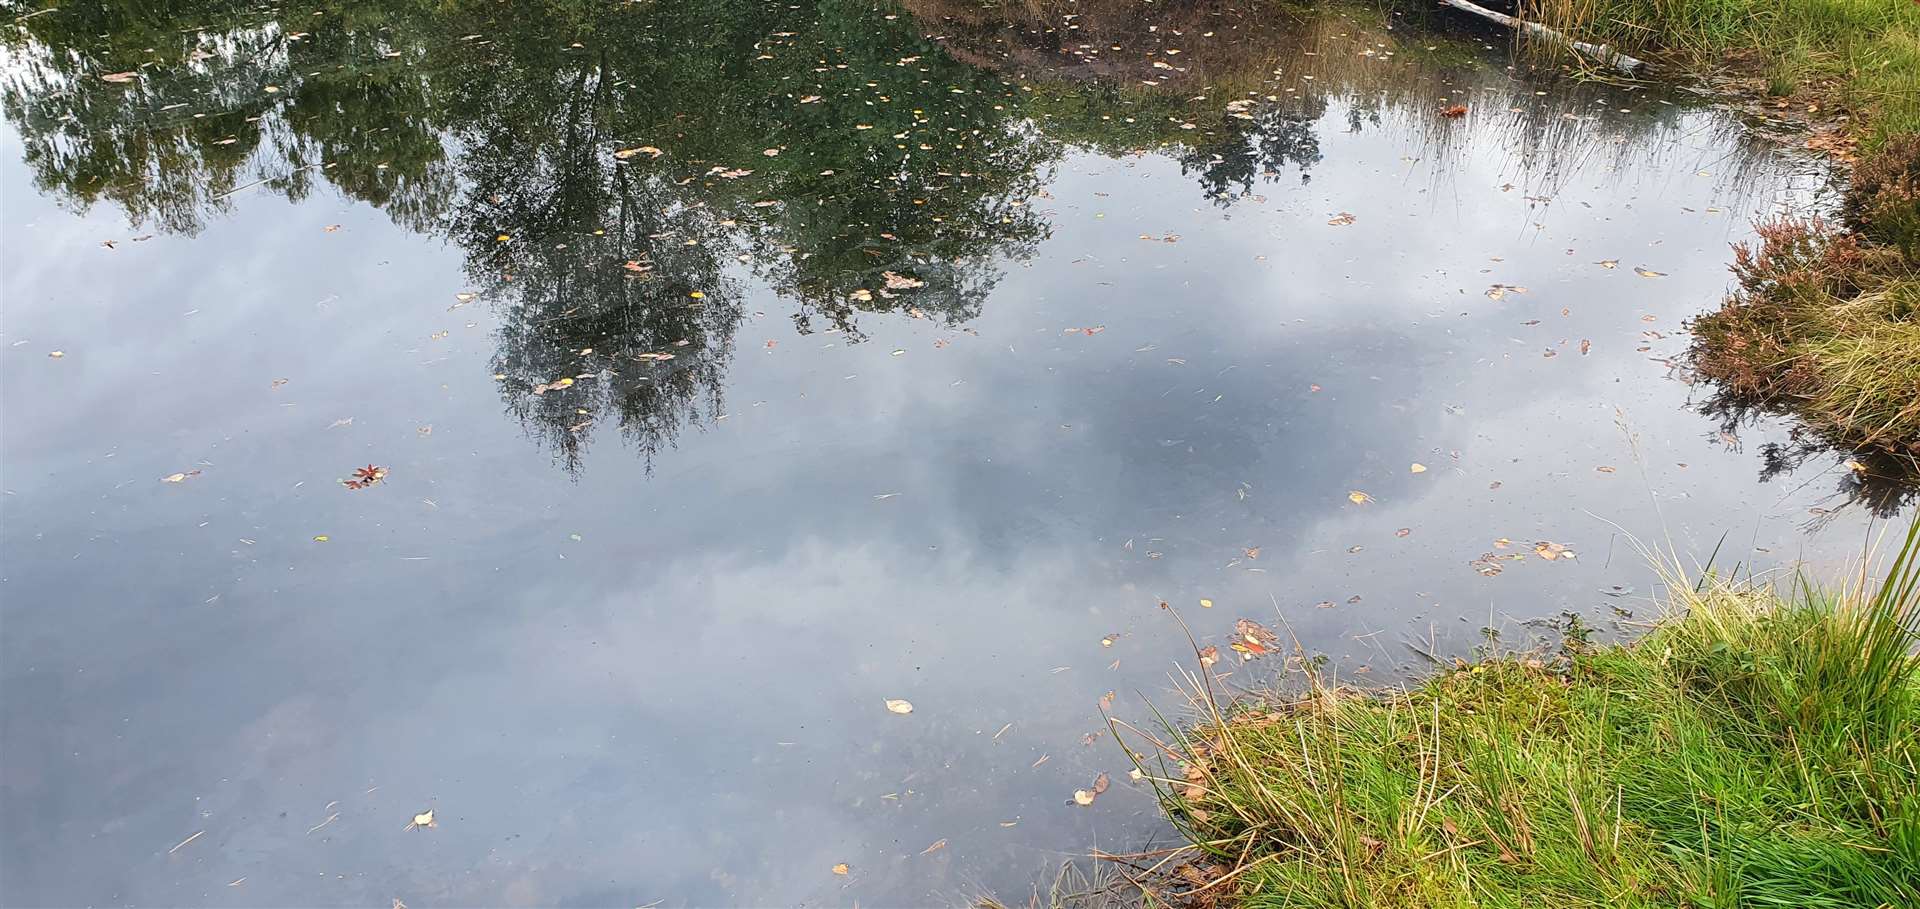 An oily-substance was found on the surface on a small pond which had full of wildlife like tadpoles earlier in the year.